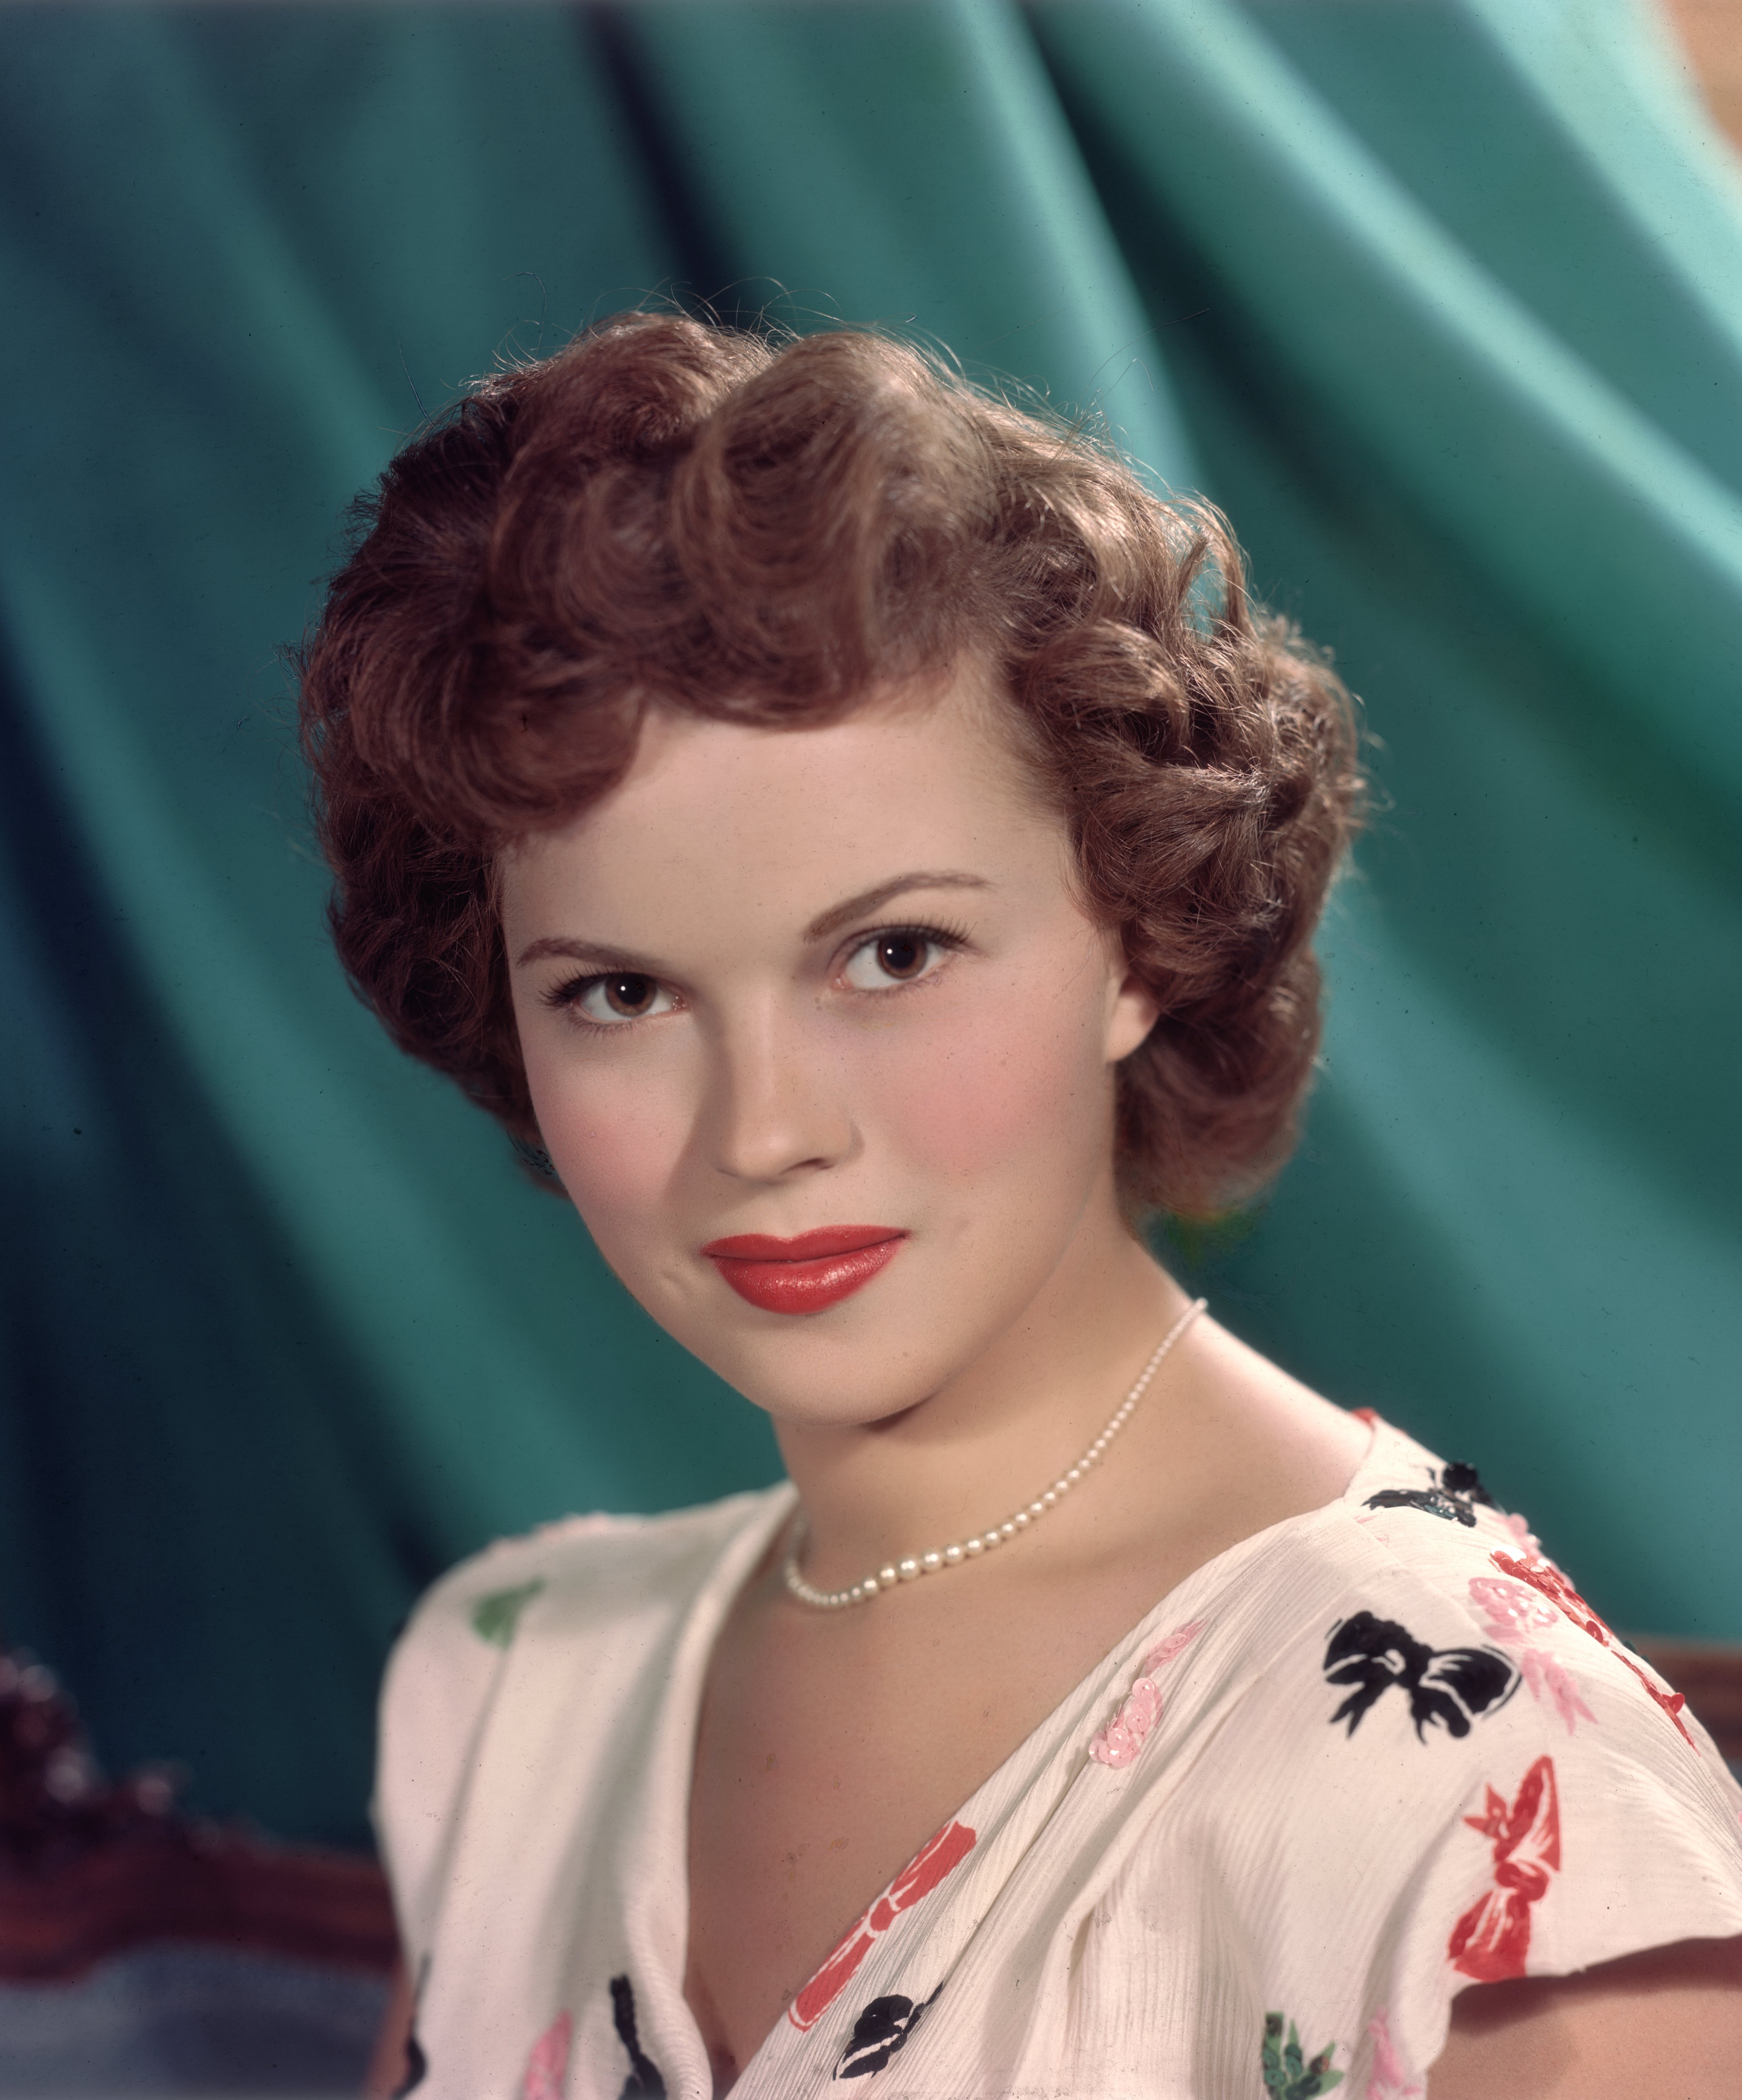  Headshot studio portrait of American actor Shirley Temple, in front of a green backdrop, wearing a short sleeve white blouse with a colored bows pattern and a pearl necklace. circa 1955 | Photo: Getty Images